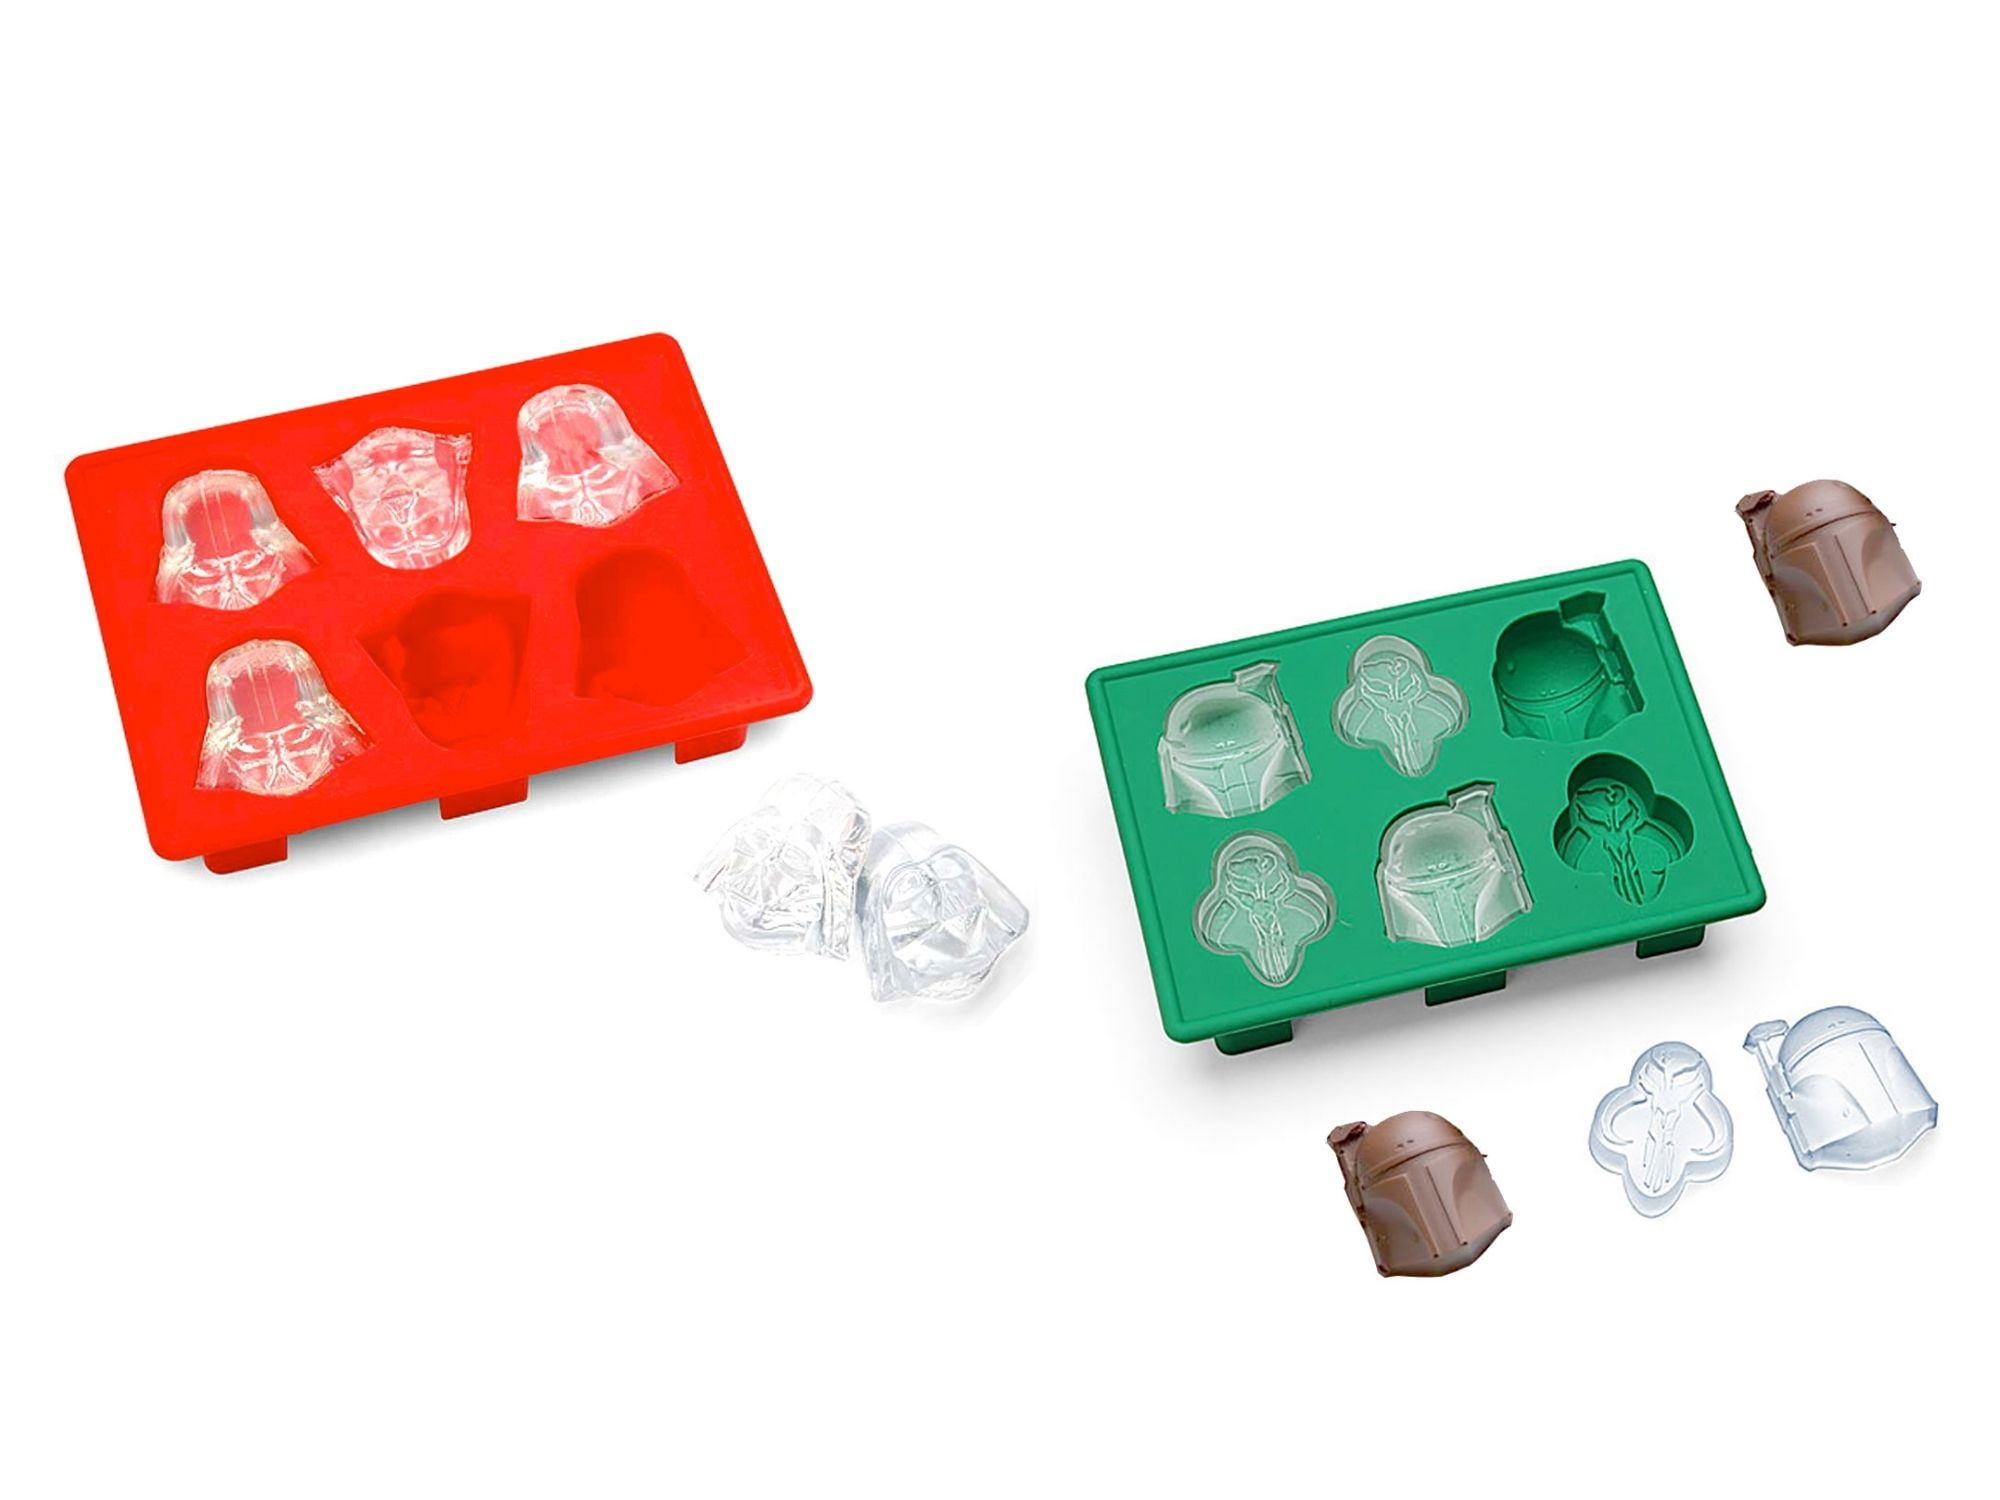 IXI Star Wars Death Star Ice Cube Tray Molds, Silicone Ice Molds Pack of 6